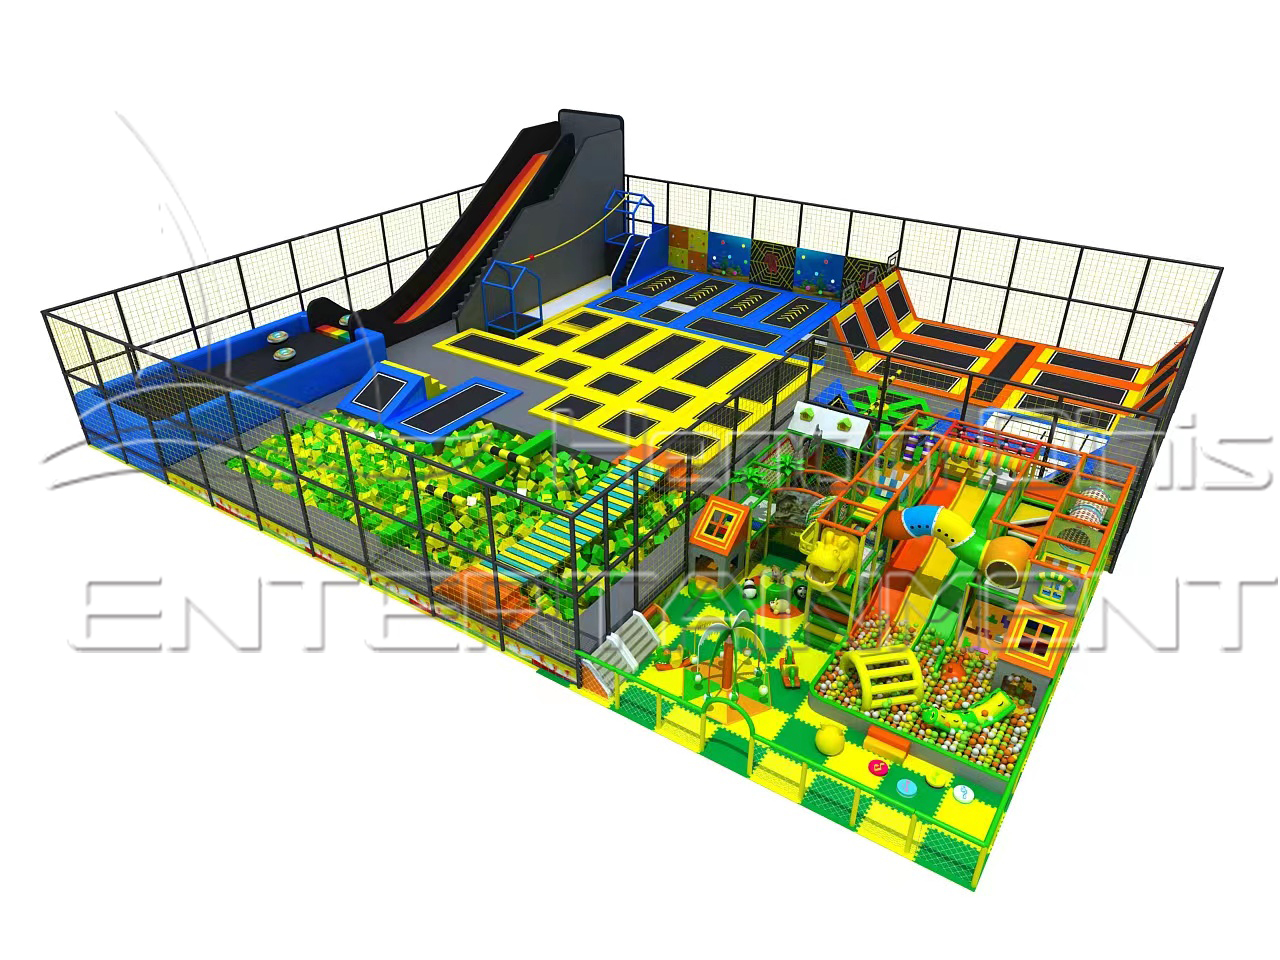 Reasons why trampoline parks can attract children